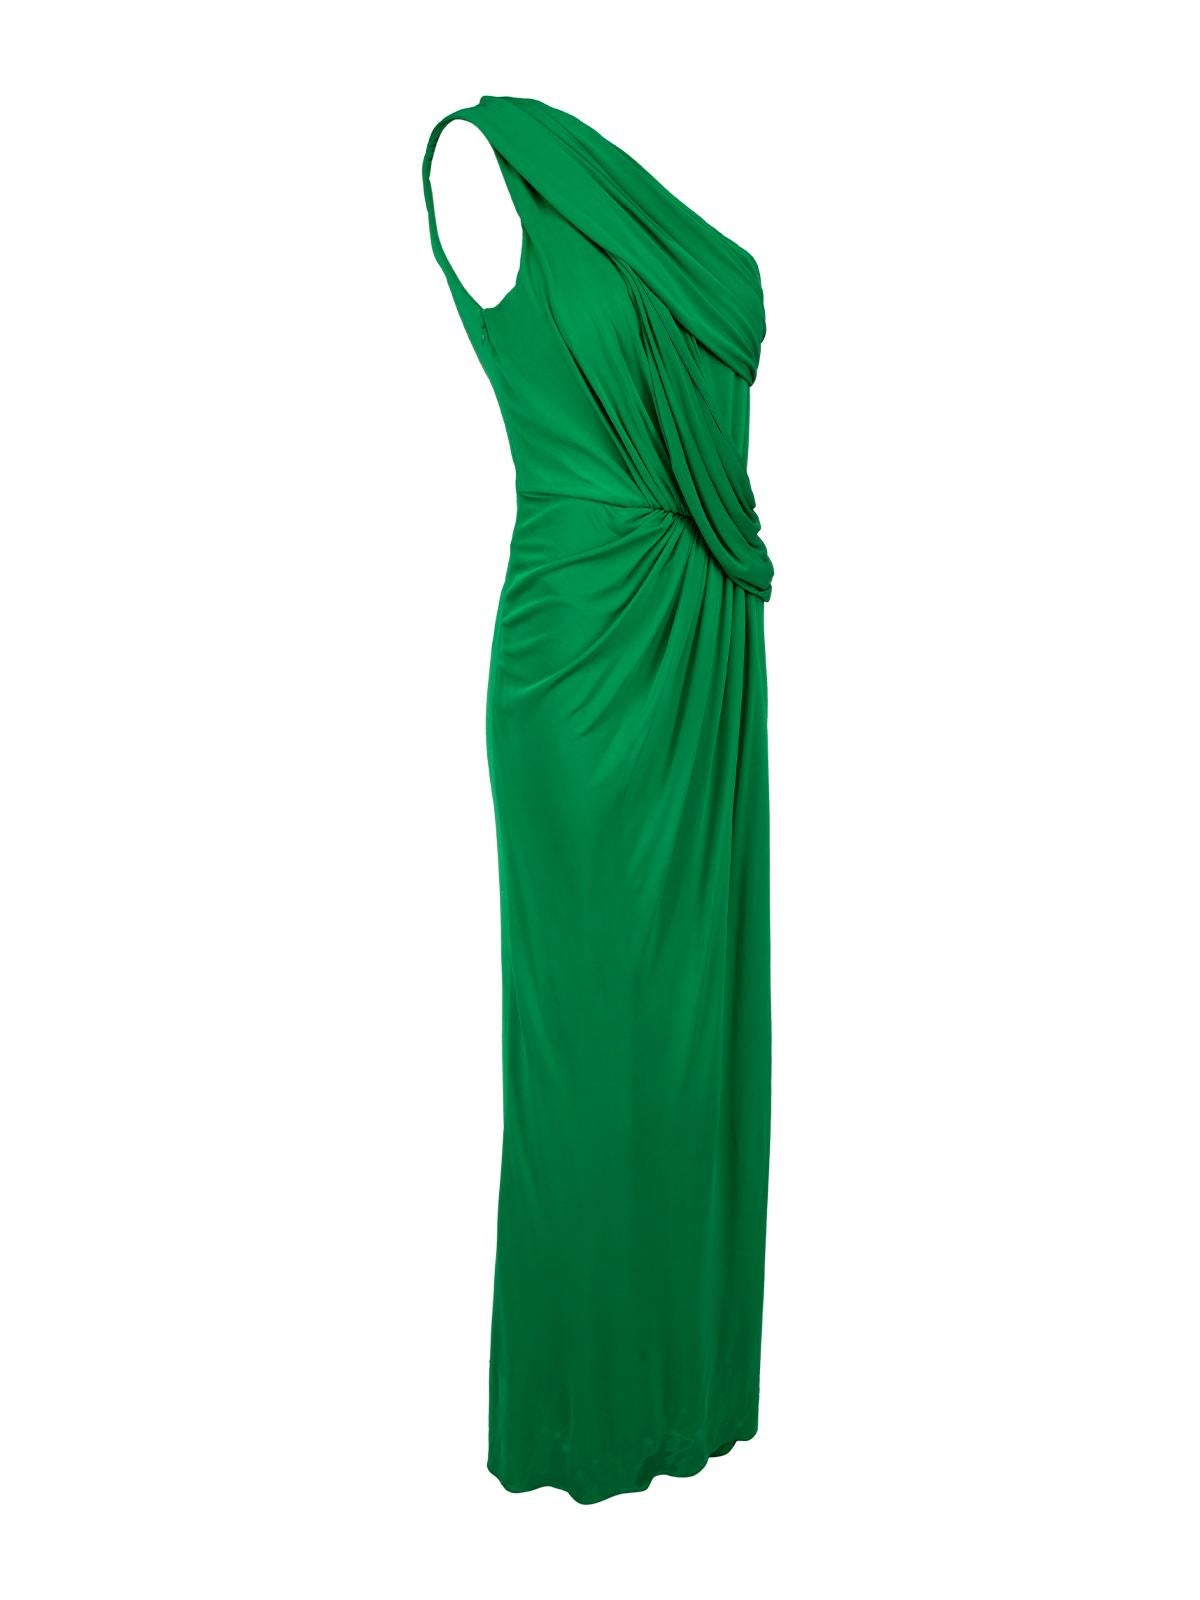 CONDITION is Good. Hardly any visible wear to this used Elie Saab designer resale item.   Details  Green Rayon Gown One Shoulder Leg slit Ruffled waistline Built in bra   Made in Lebanon   Composition 100% Rayon Care instructions: Professional dry